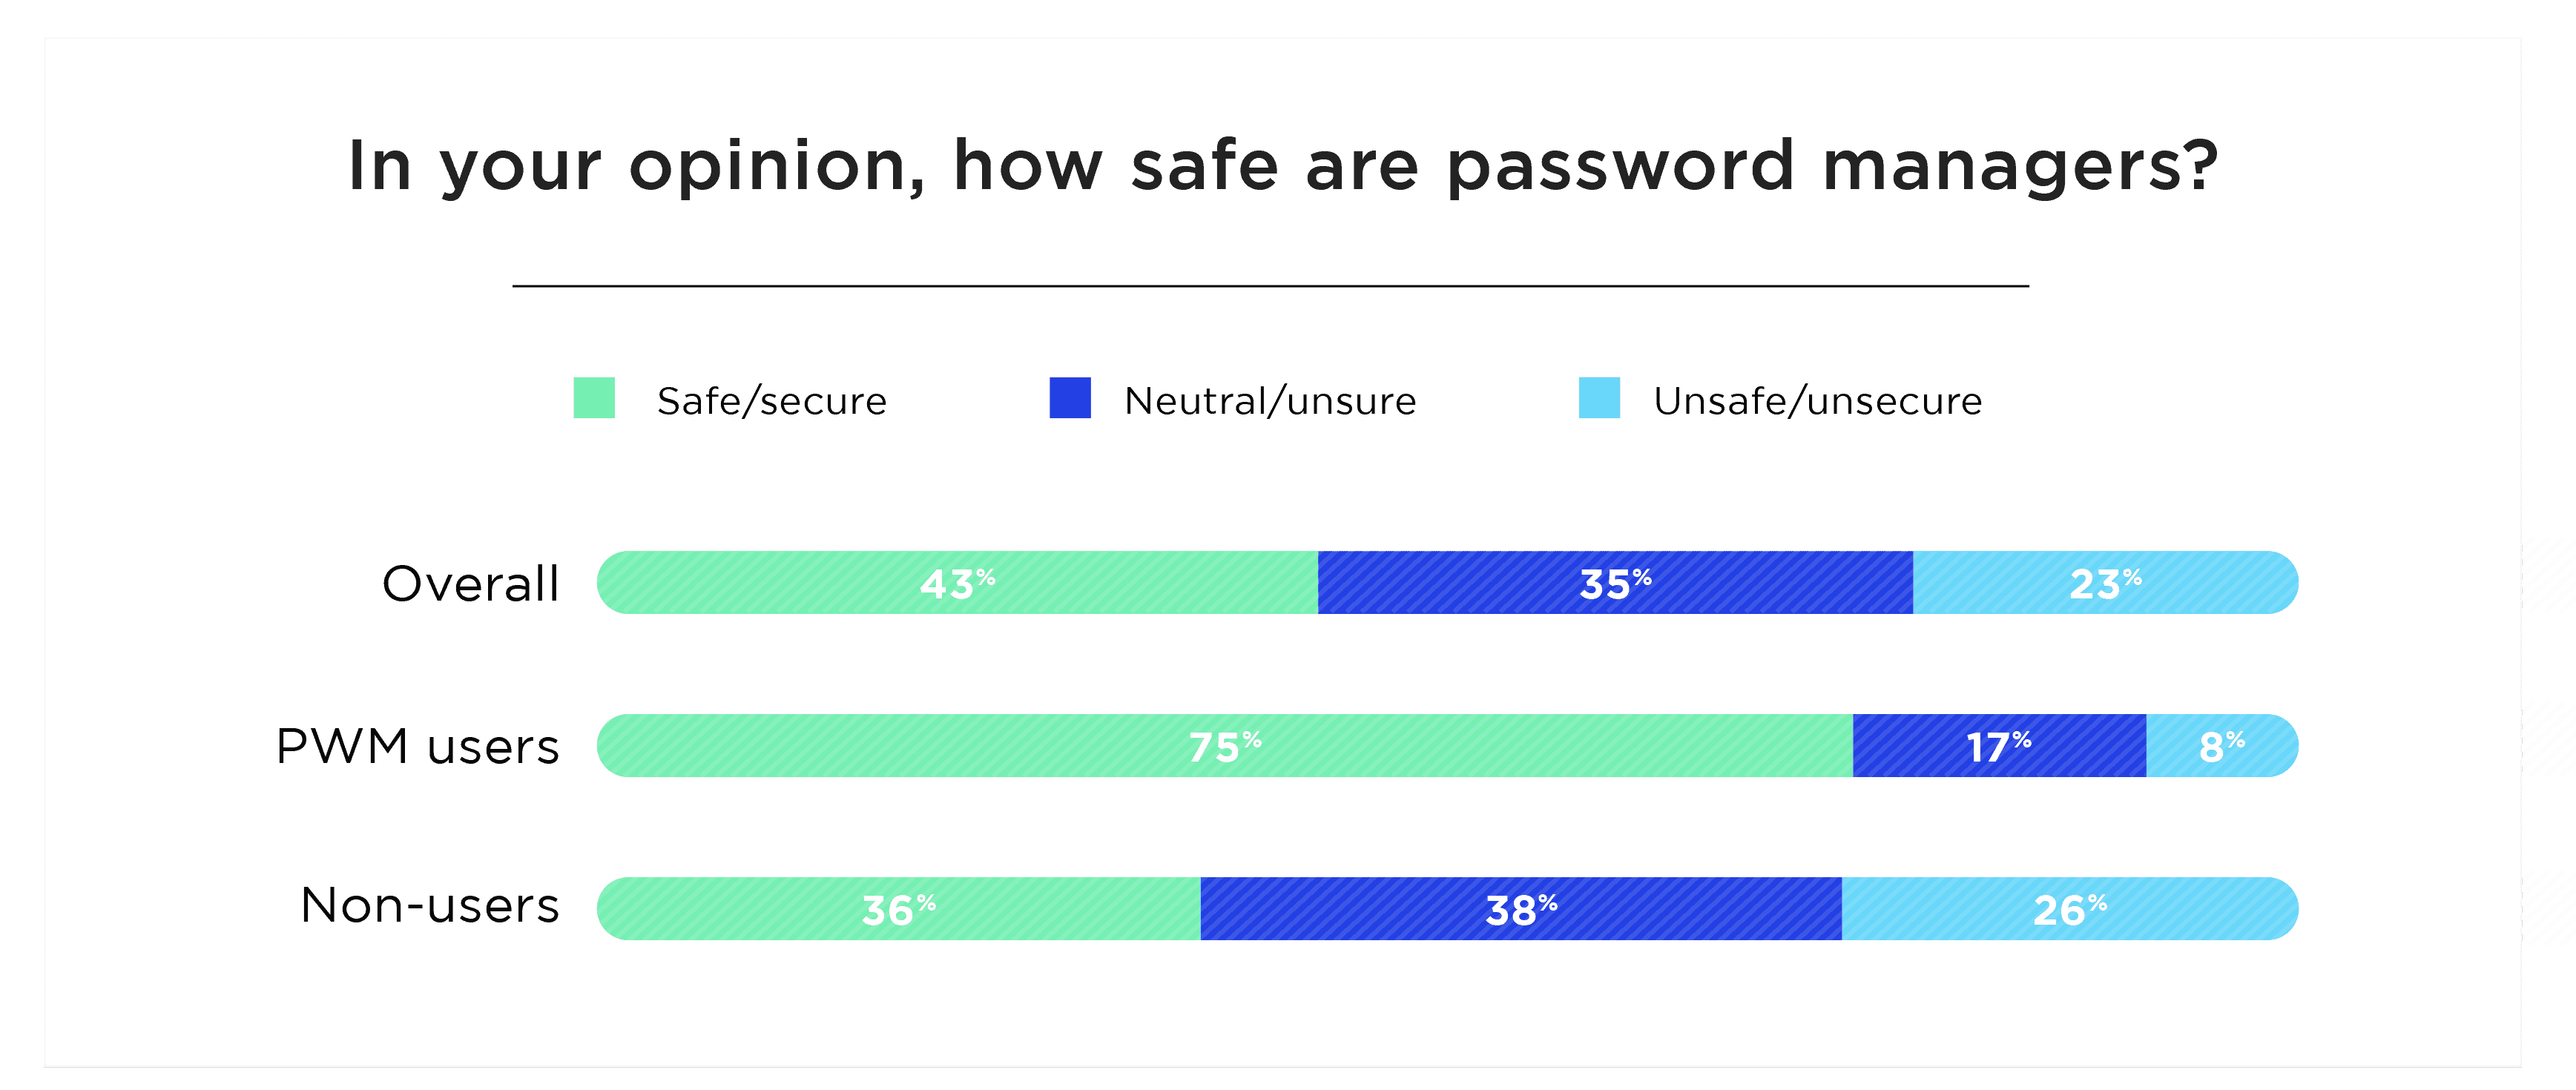 In your opinion, how safe are password managers